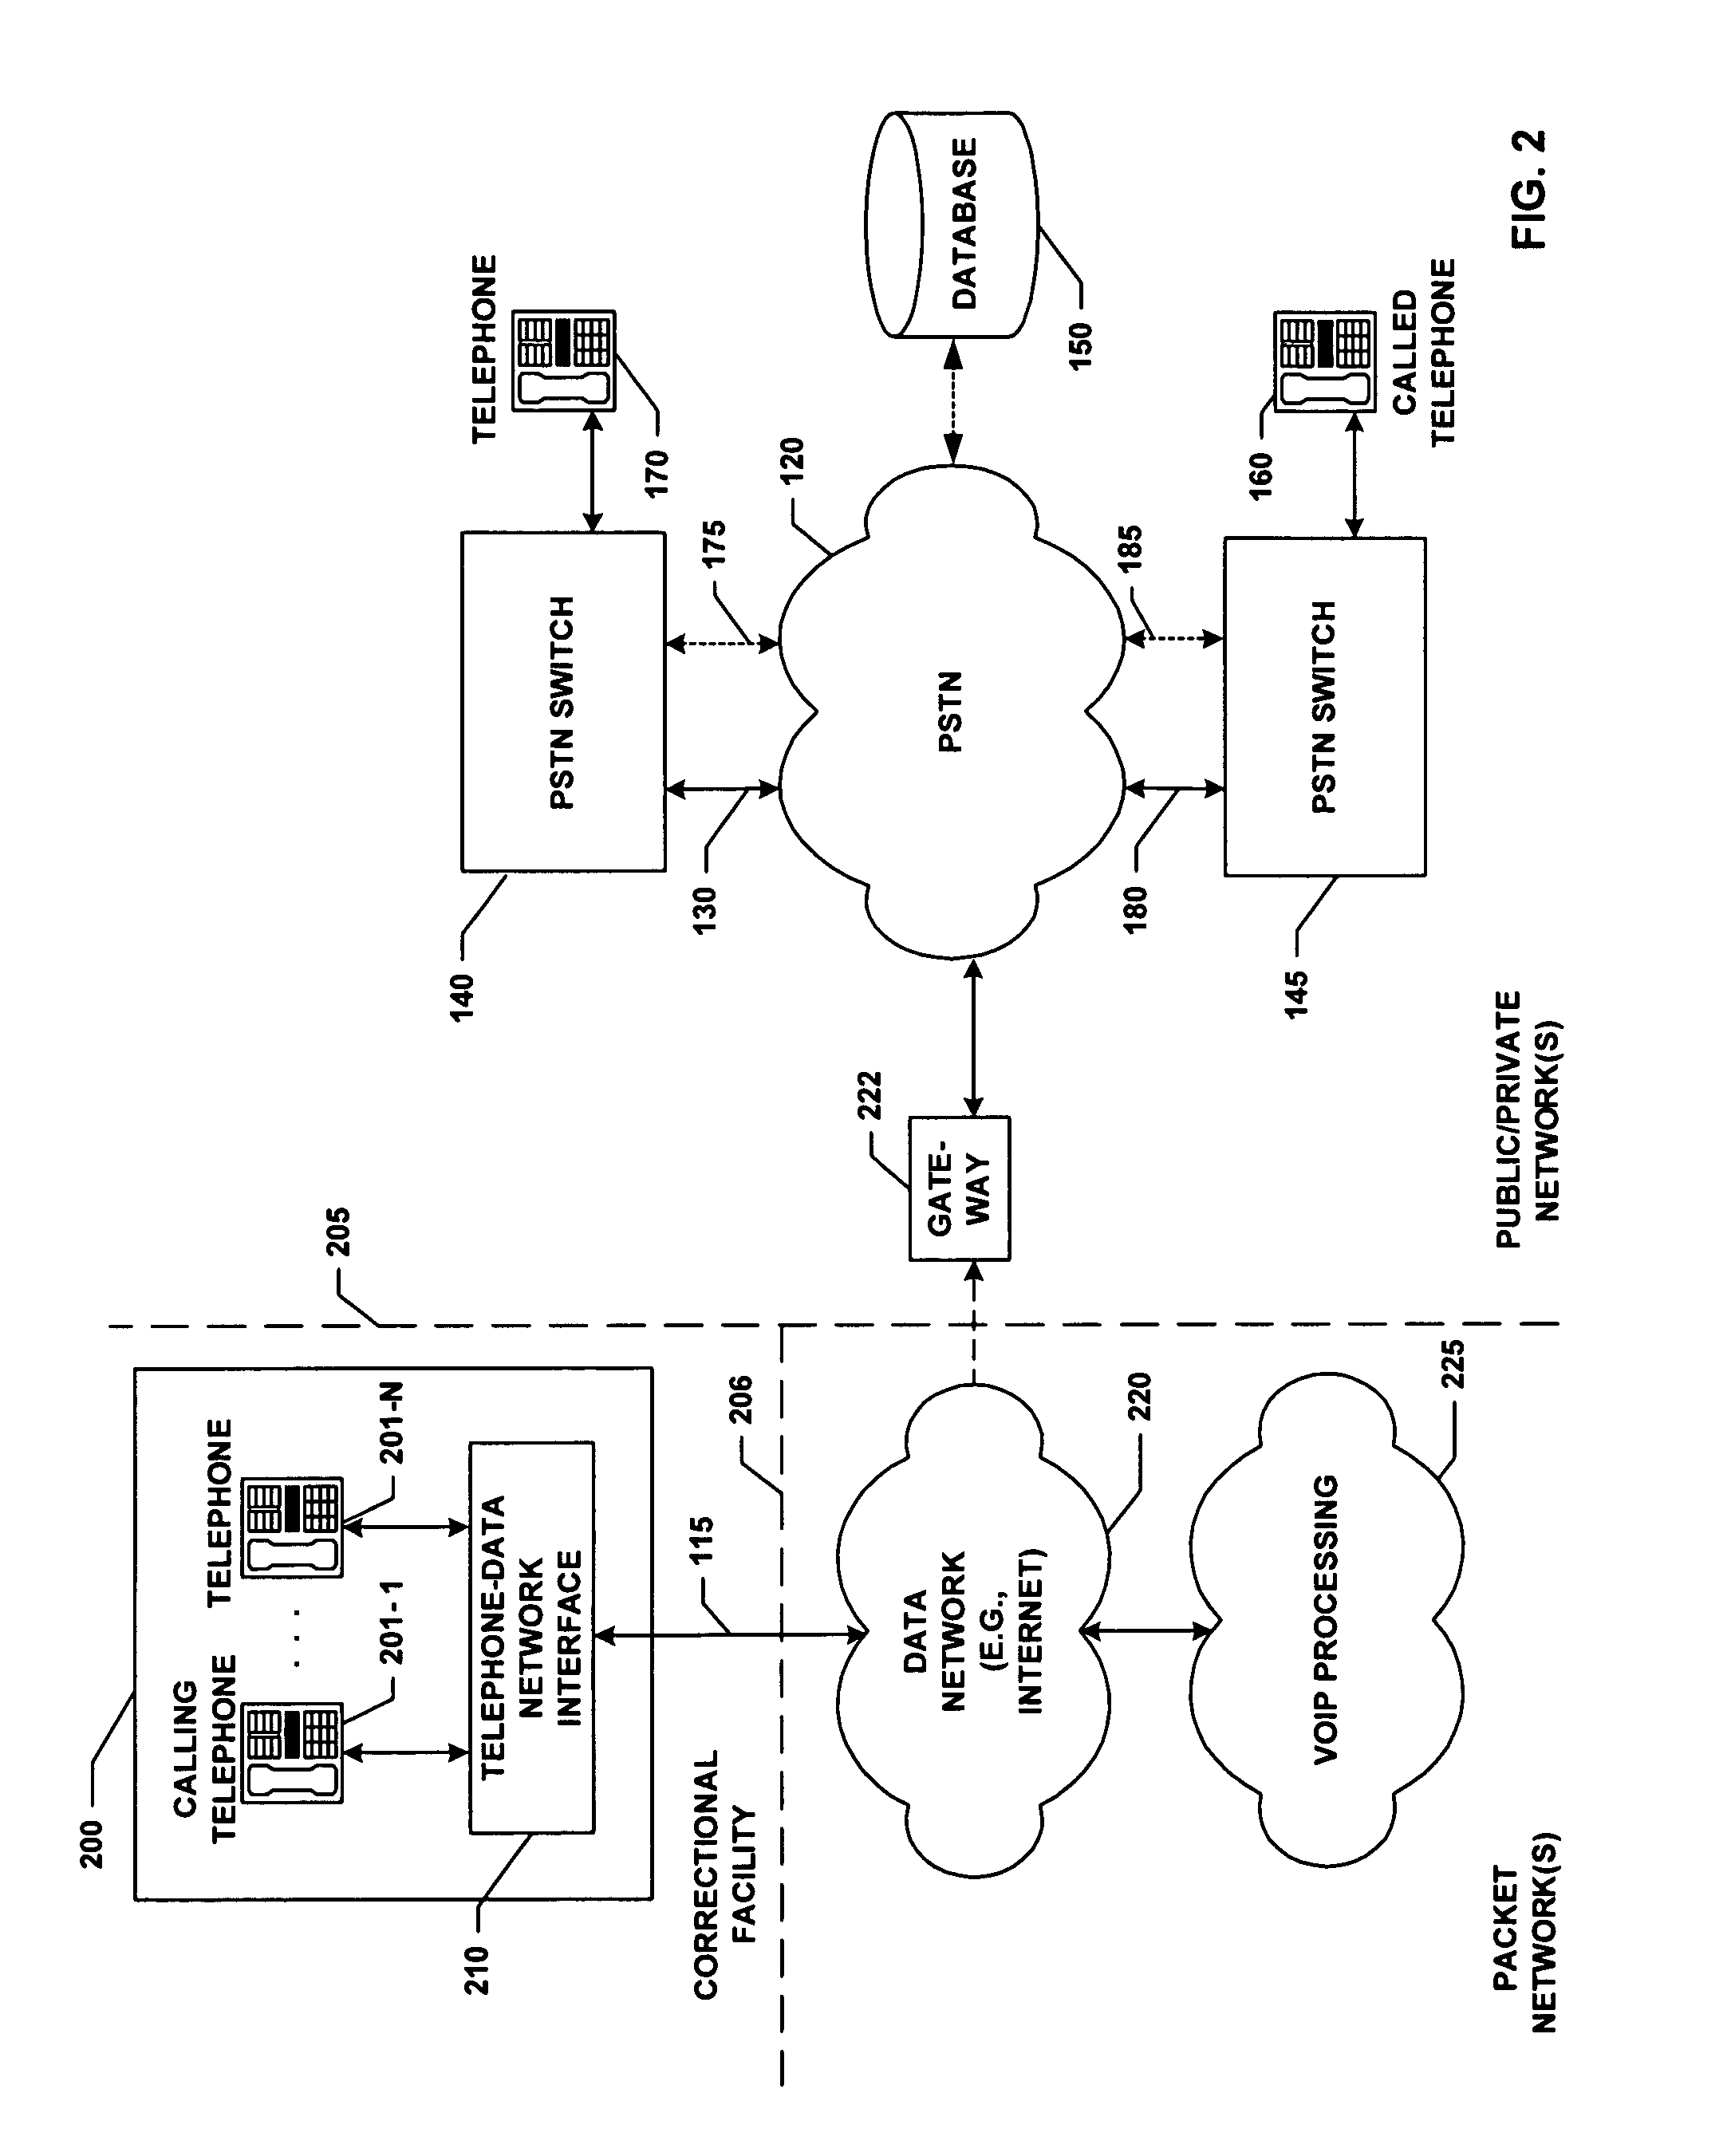 Telephony system and method with enhanced fraud control